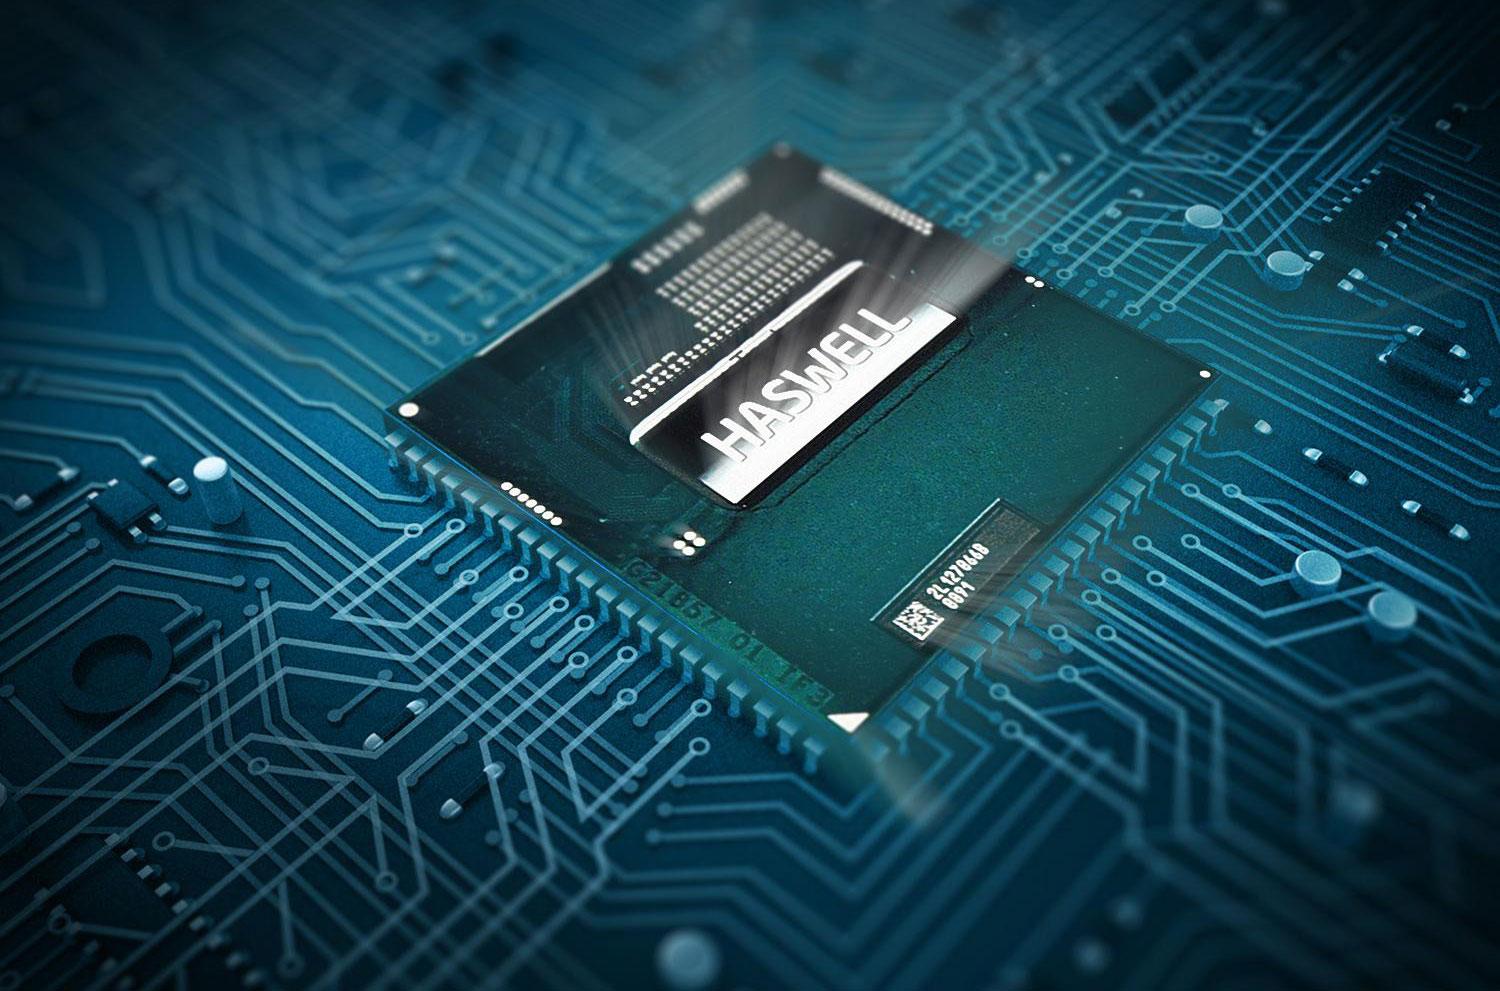 Intel 4th gen haswell chip